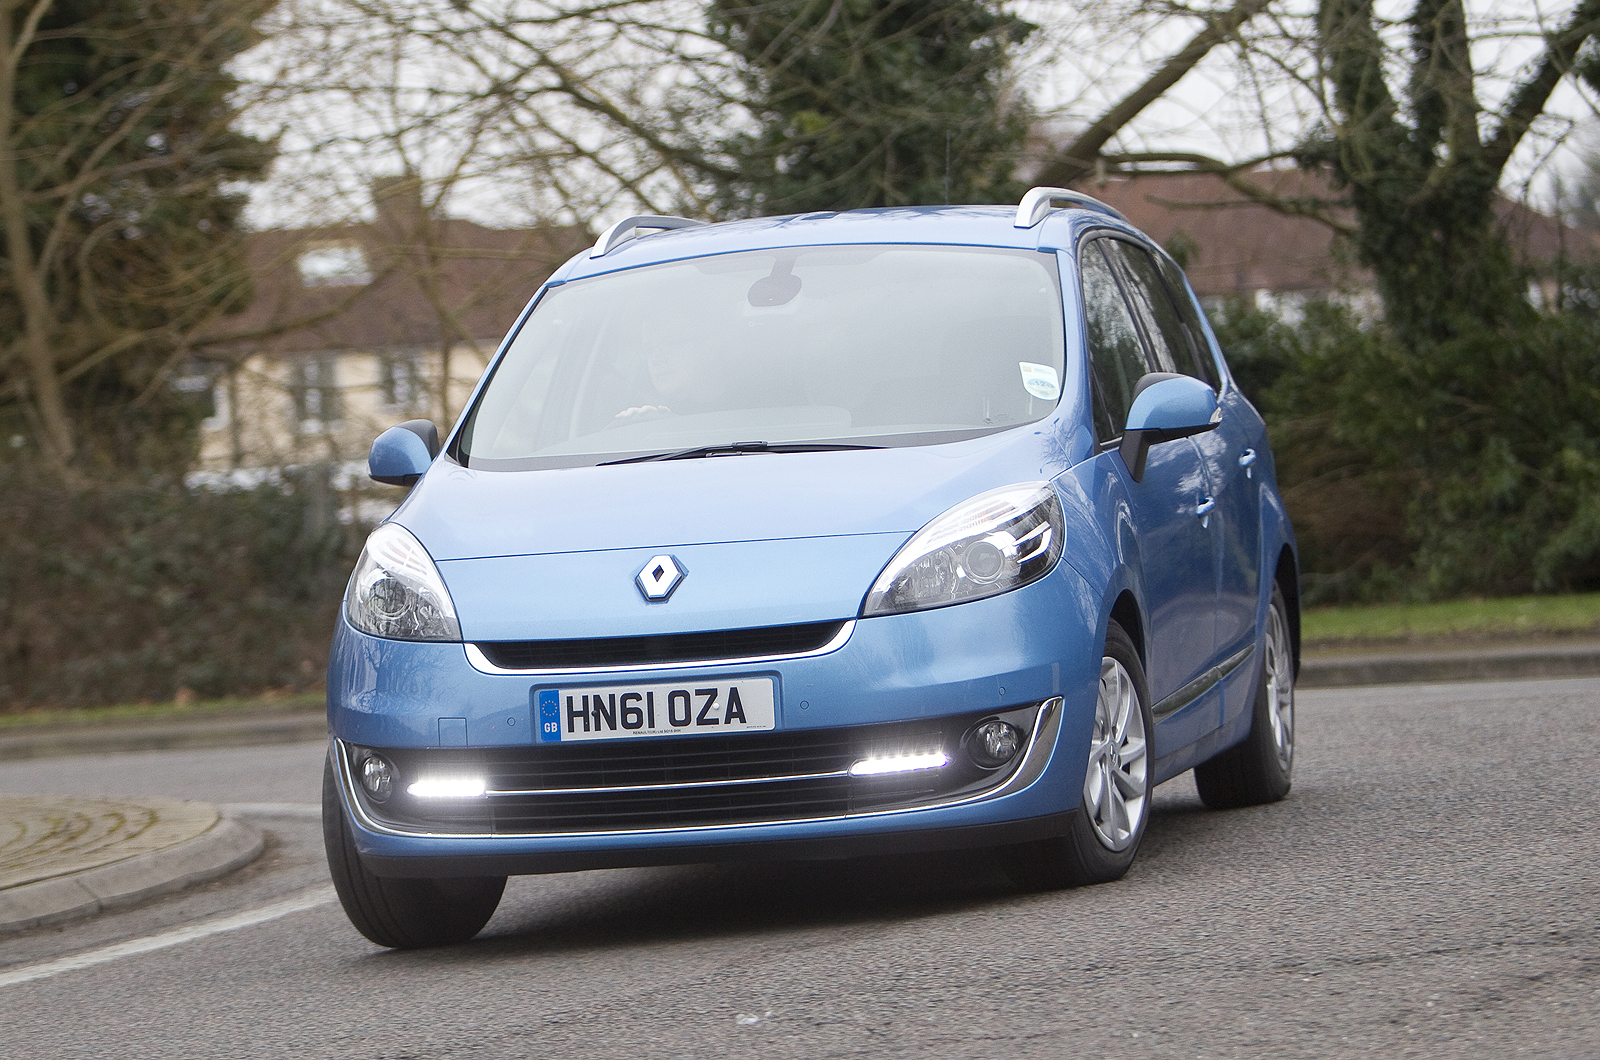 Renault Grand Scenic 1.5 dCi 110 Stop and Start review